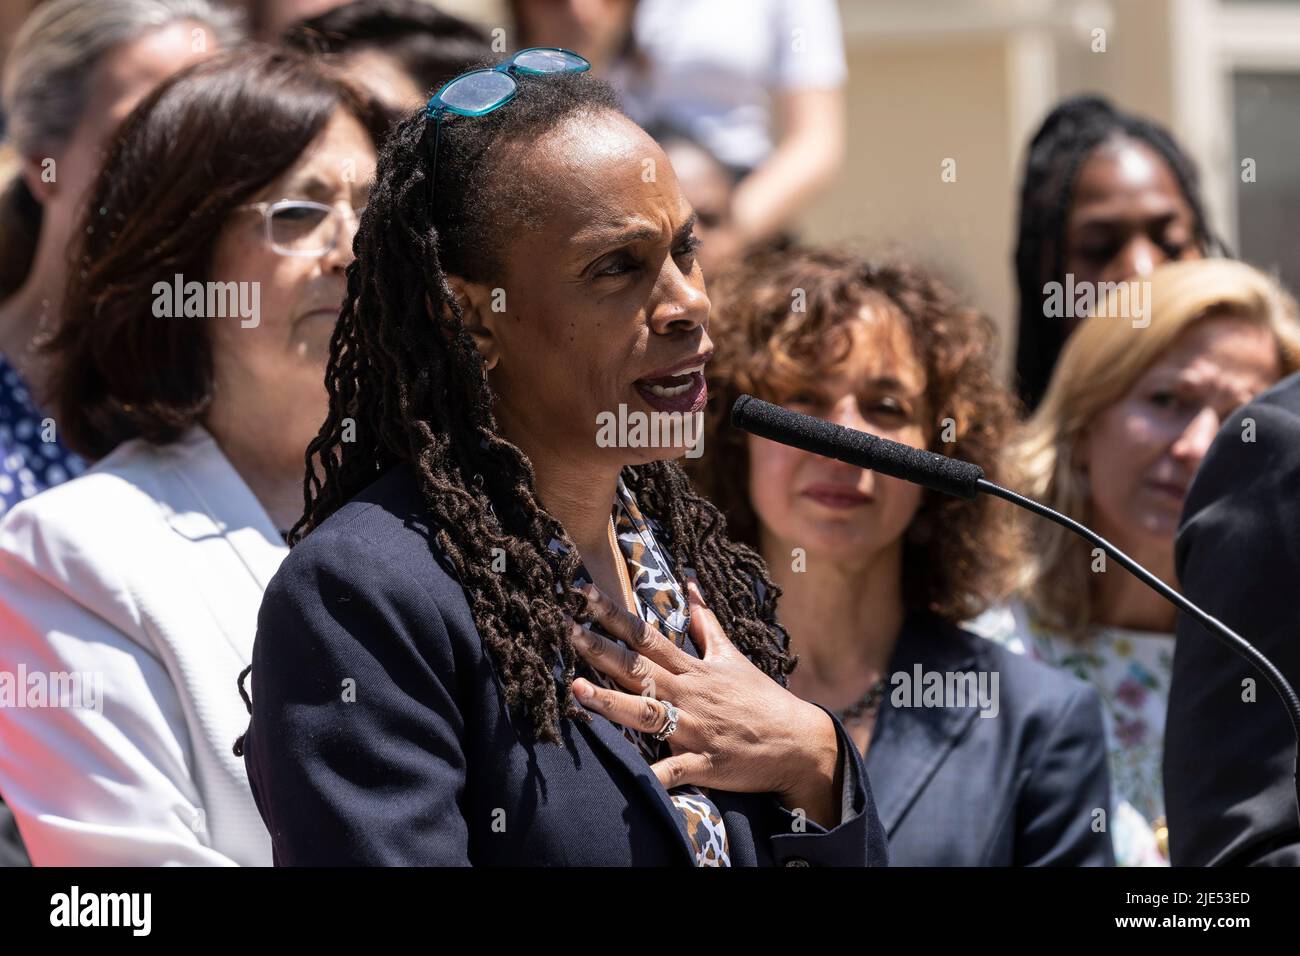 New York, NY - June 24, 2022: Deputy Mayor for Health and Human Services Anne Williams-Isom speaks as Mayor Eric Adams and city employees gathered on steps of City Hall on the U.S. Supreme Court decision overturning Roe vs. Wade effectively banning abortions in the US Stock Photo